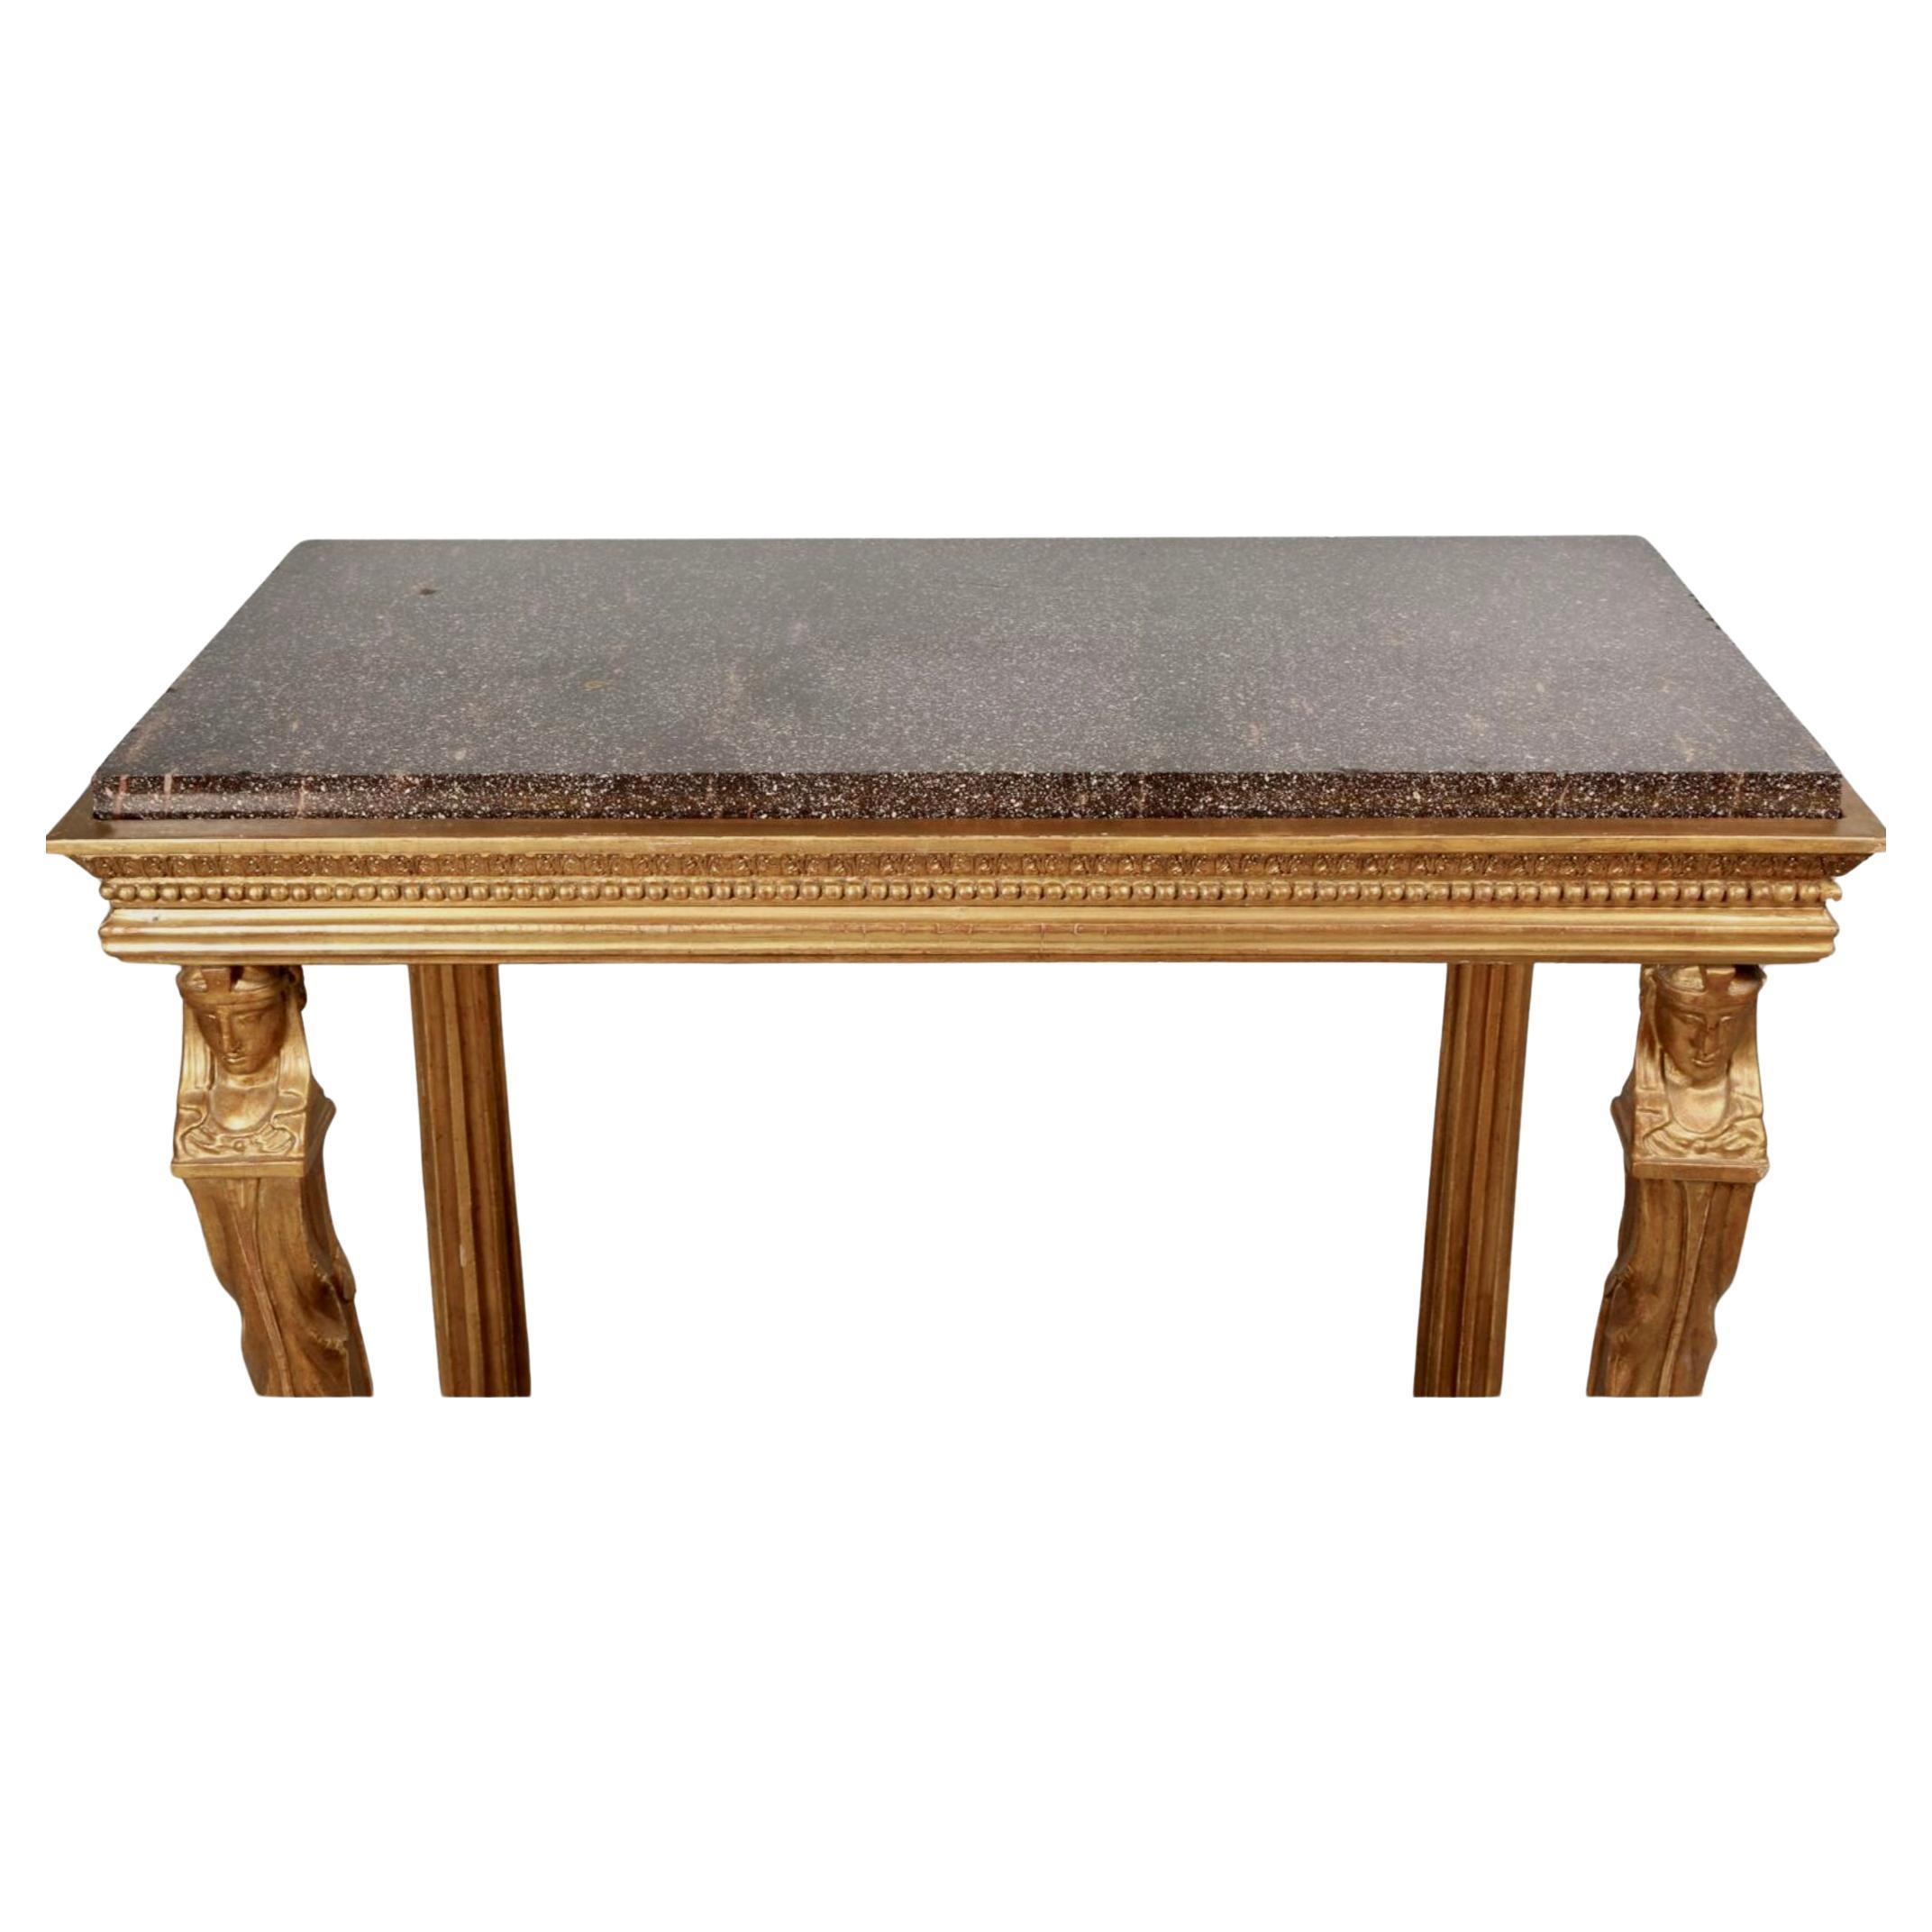 Swedish Neoclassical Giltwood Porphyry Top Console Table, Early 19th Century For Sale 2